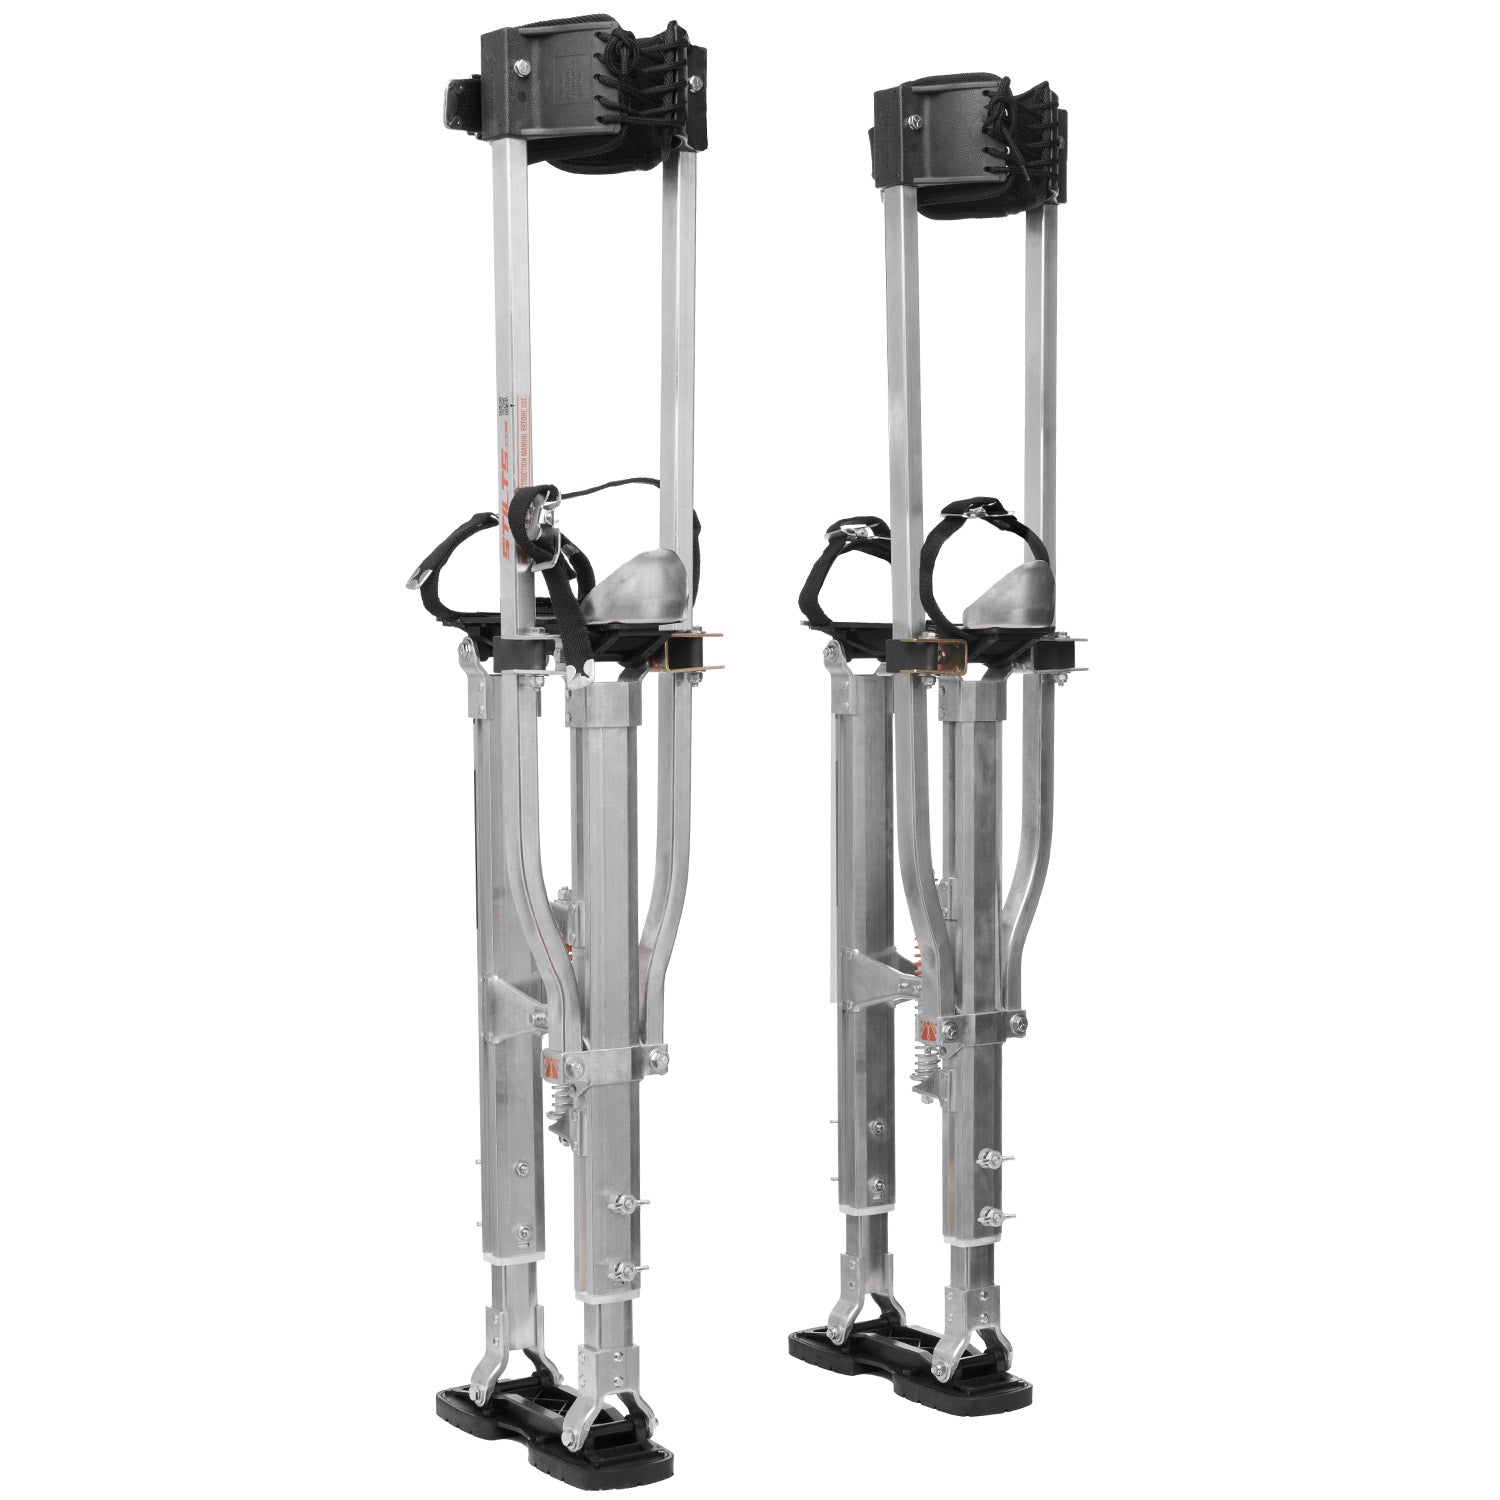 S2 Aluminum Drywall Stilts are preferred by professionals that demand safety